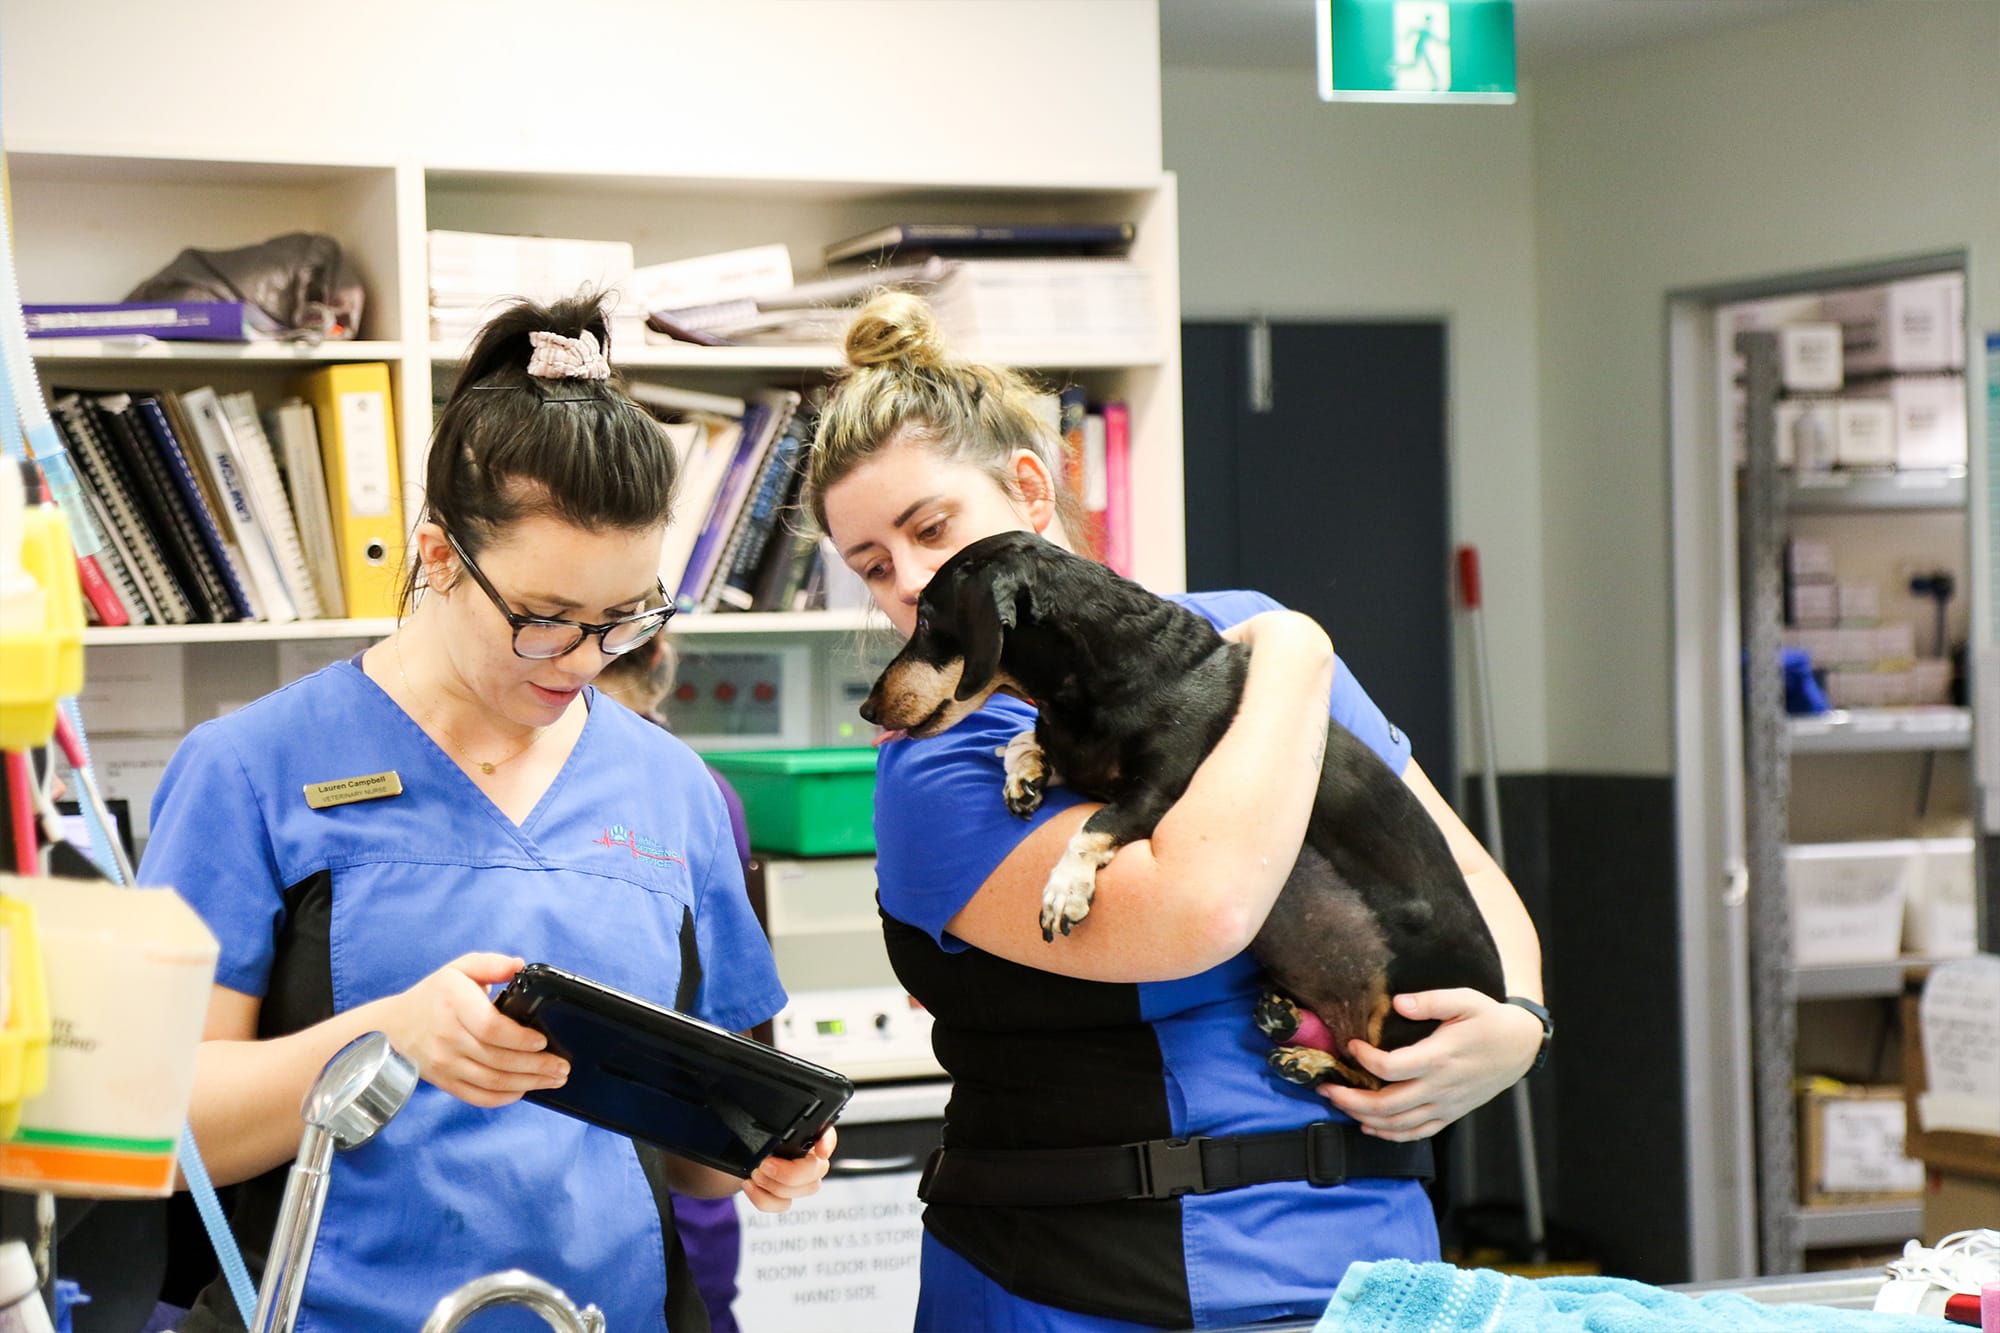 Two veterinary nurses at Animal Emergency Service Carrara talking with a dachshund on the arm